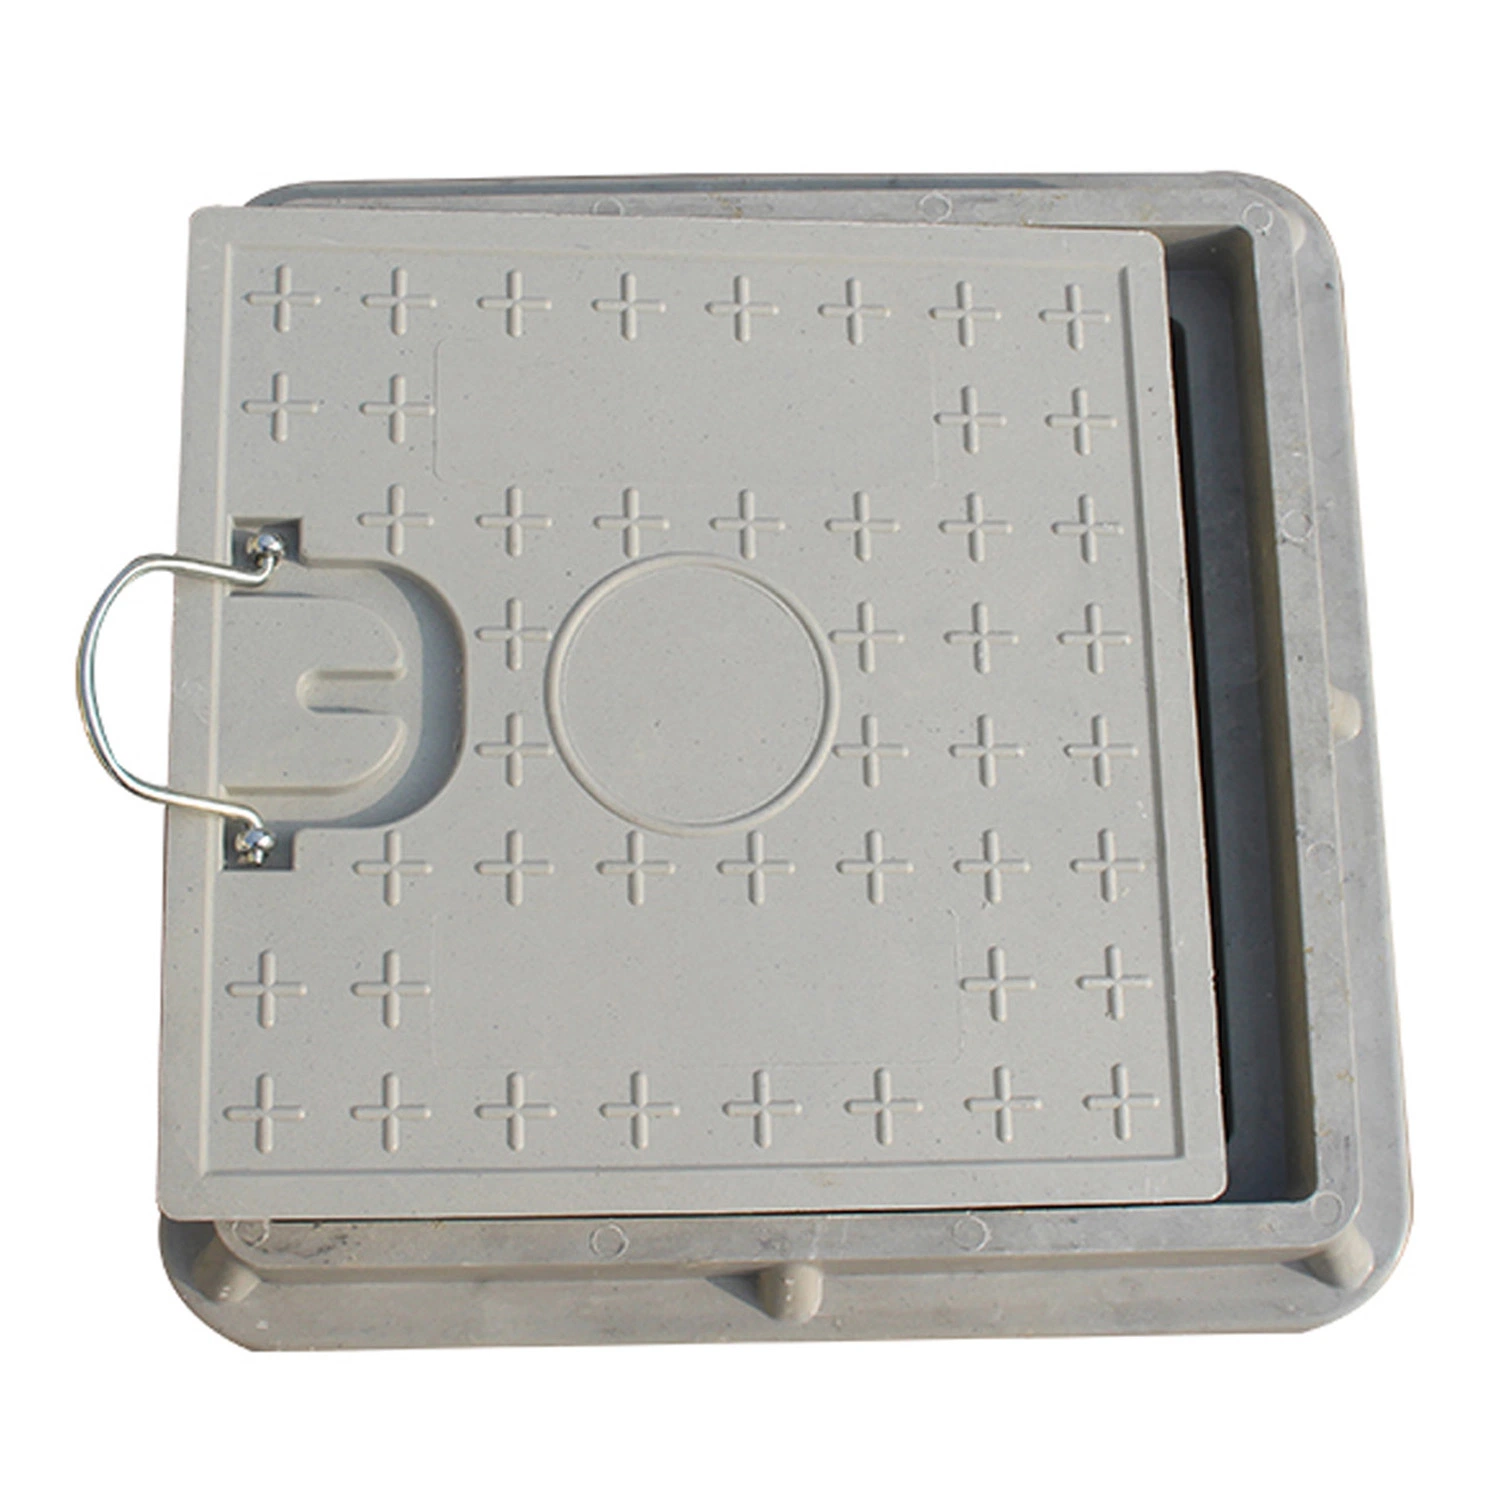 FRP Manhole Cover for Road Construction Use